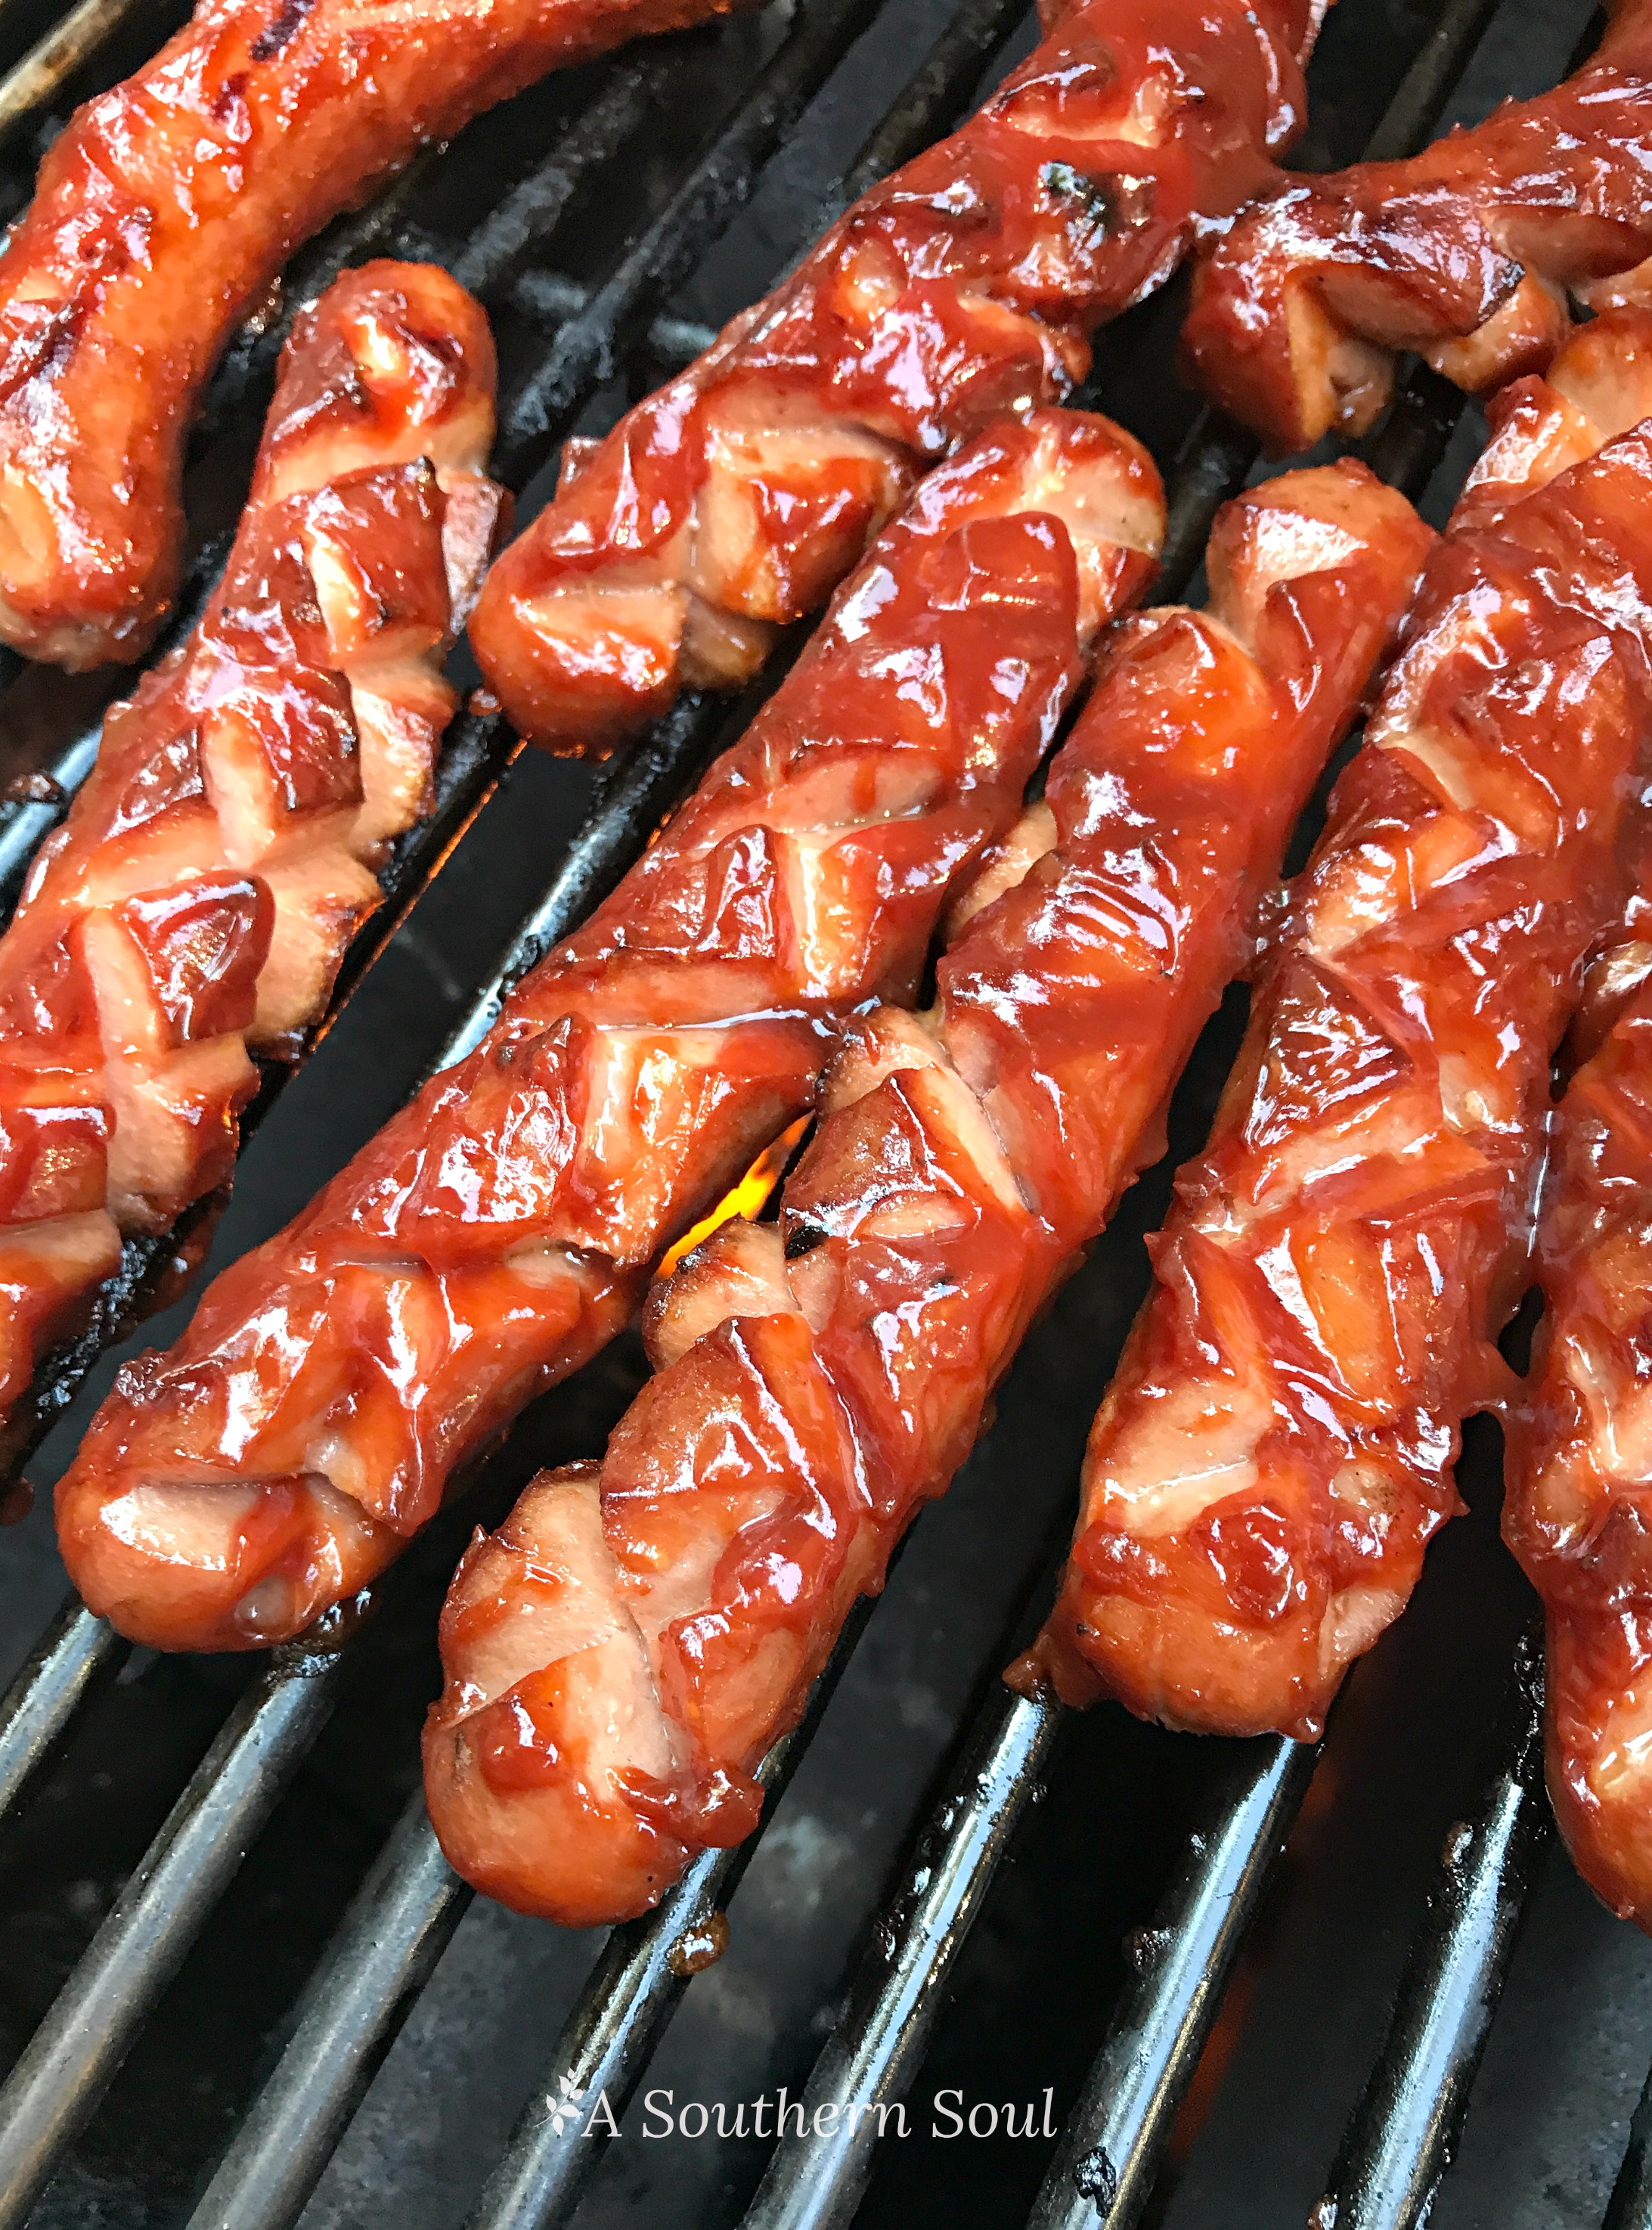 Grilled Barbecued Hot Dogs - A Southern Soul